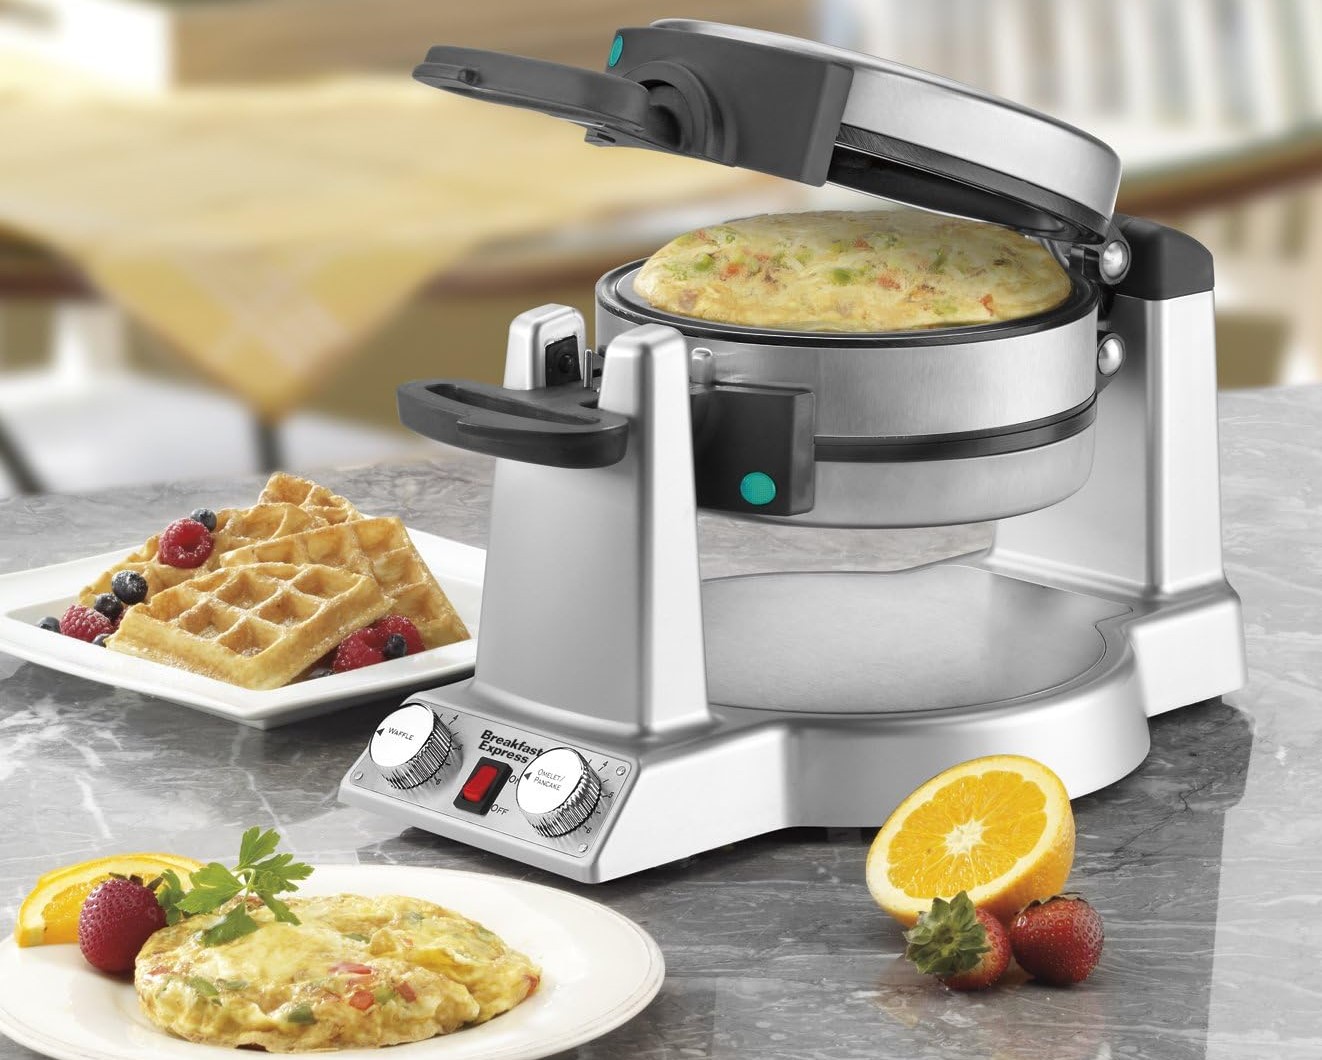 What Can I Cook In My Waffle Iron